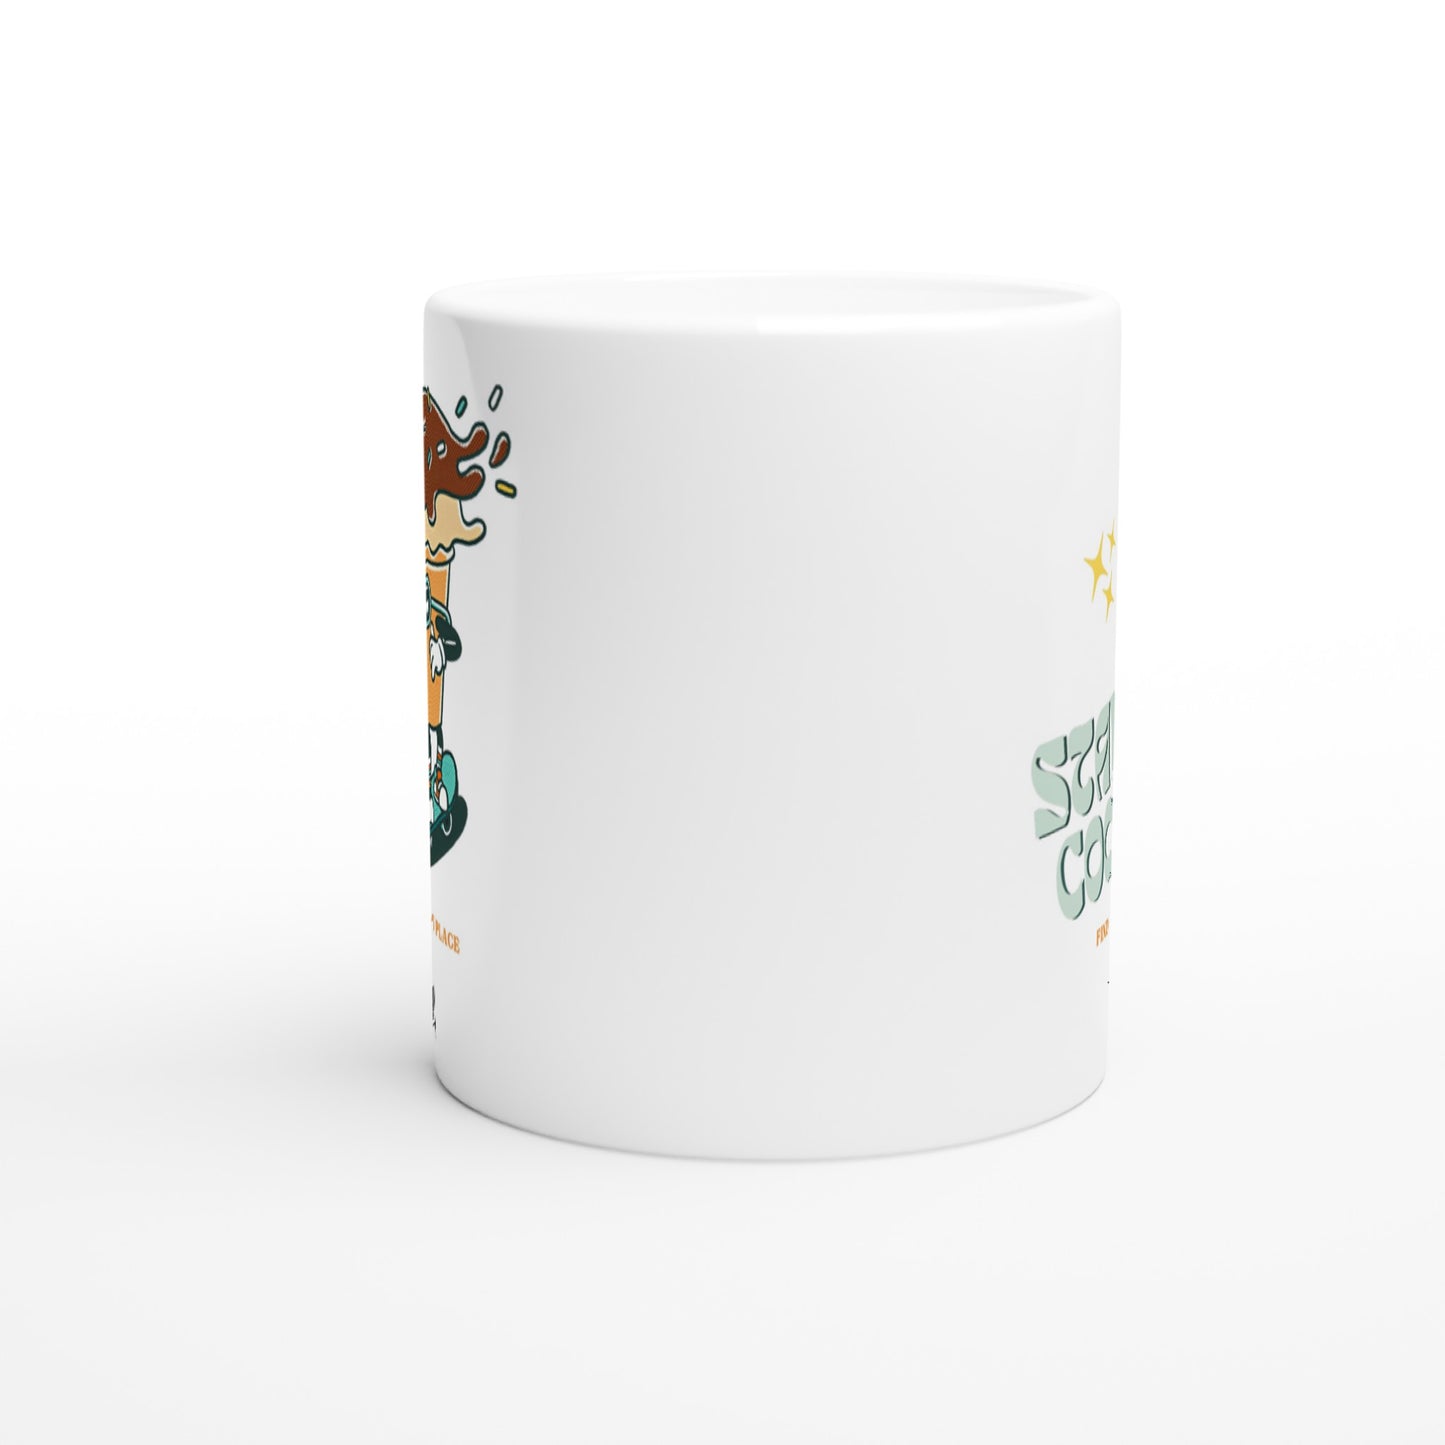 Personalise - Stay Cool, Ice Cream - White 11oz Ceramic Mug Personalised Mug customise personalise Retro